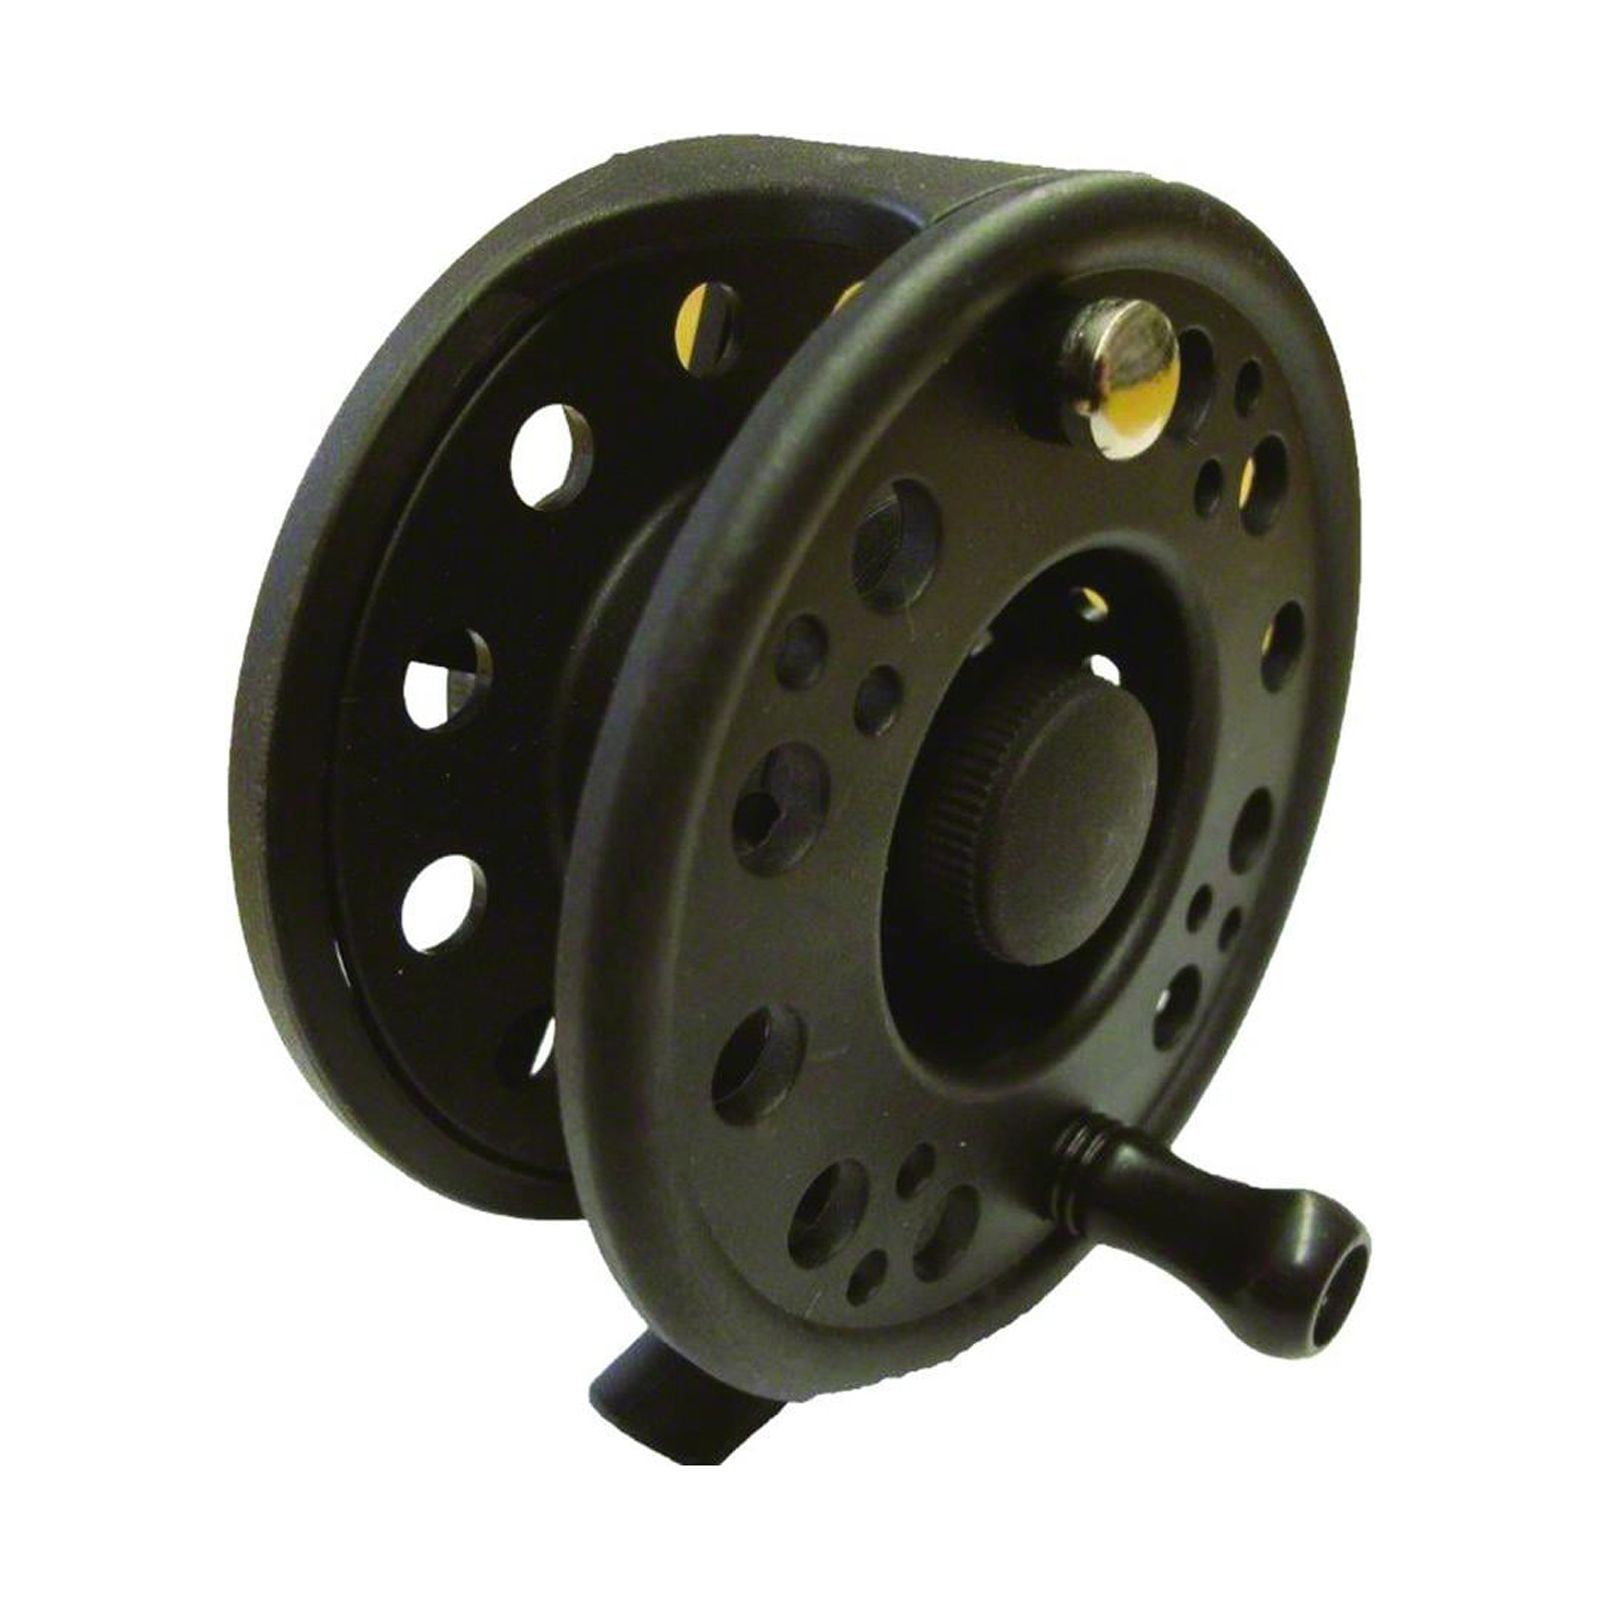 Silvertip II 3/4 Fly Fishing Reel Spooled With 4WT Fly Line